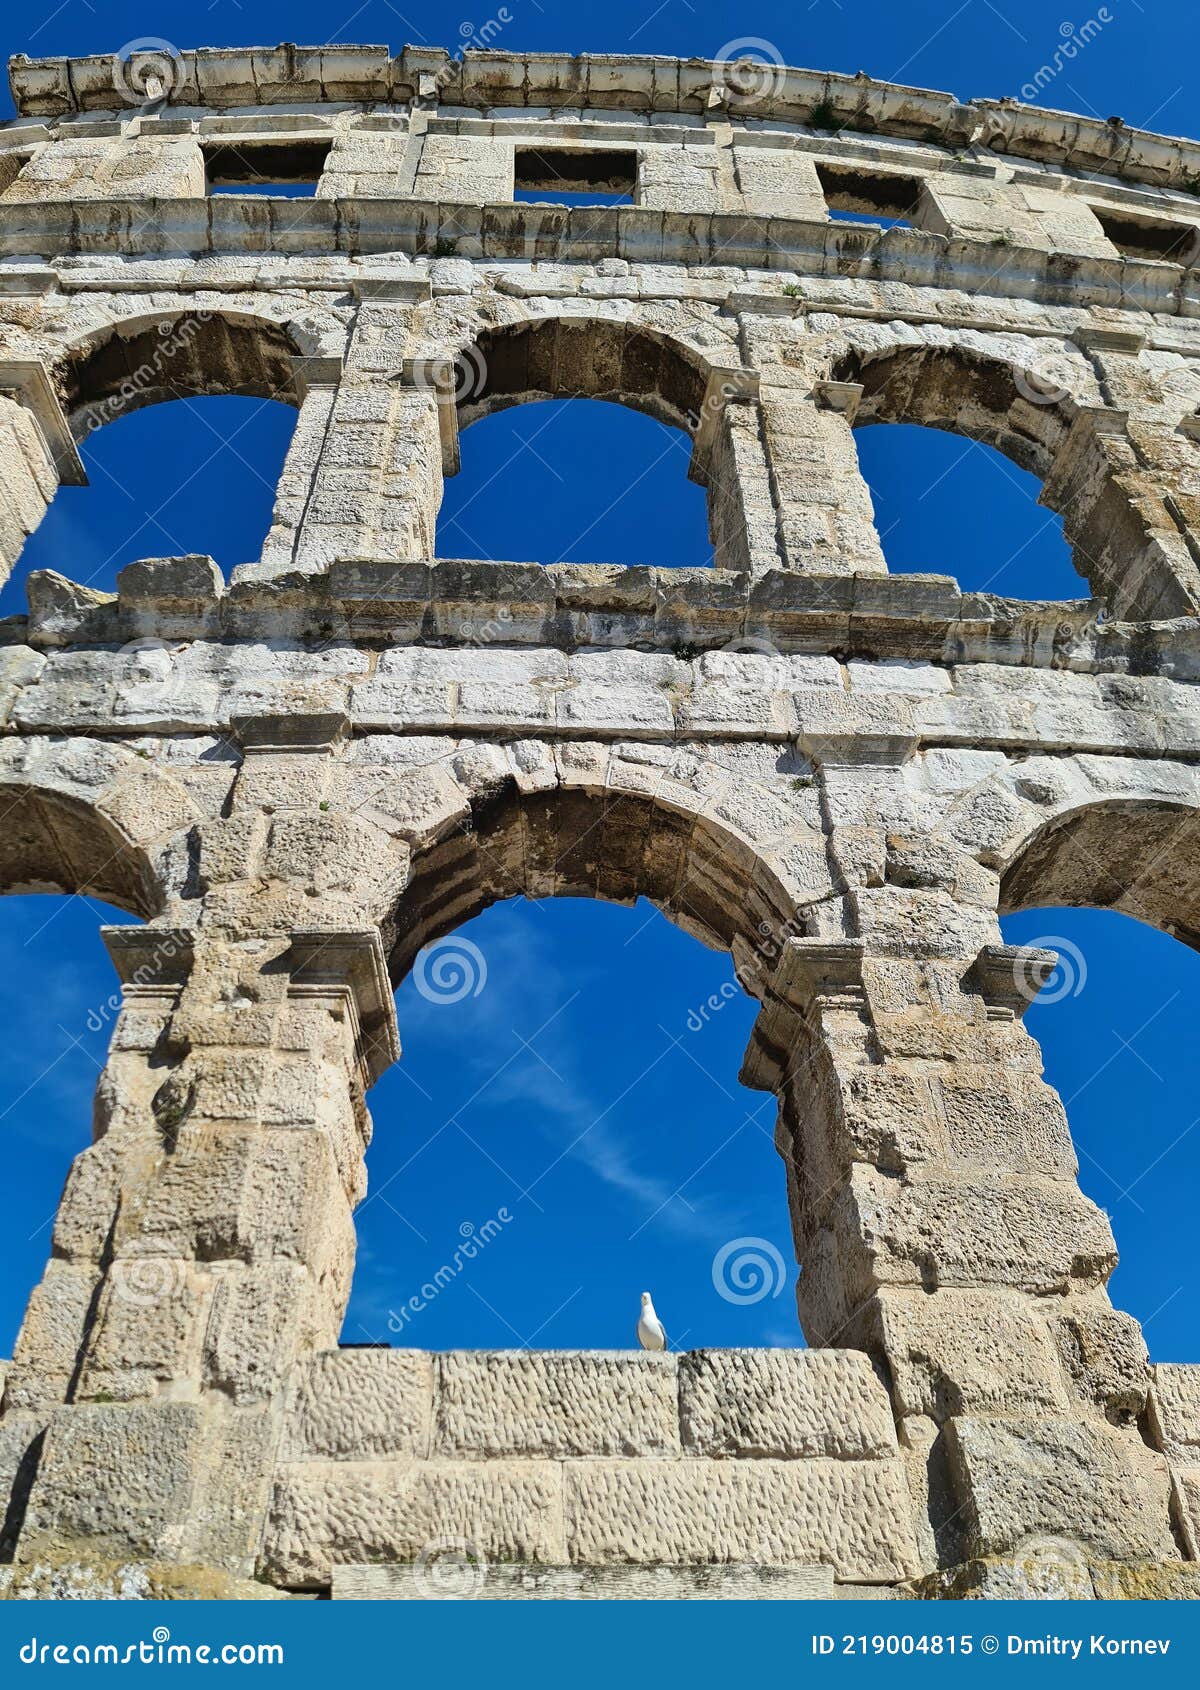 perfectly maintained ruins of a roman colloseum in pula, croatia